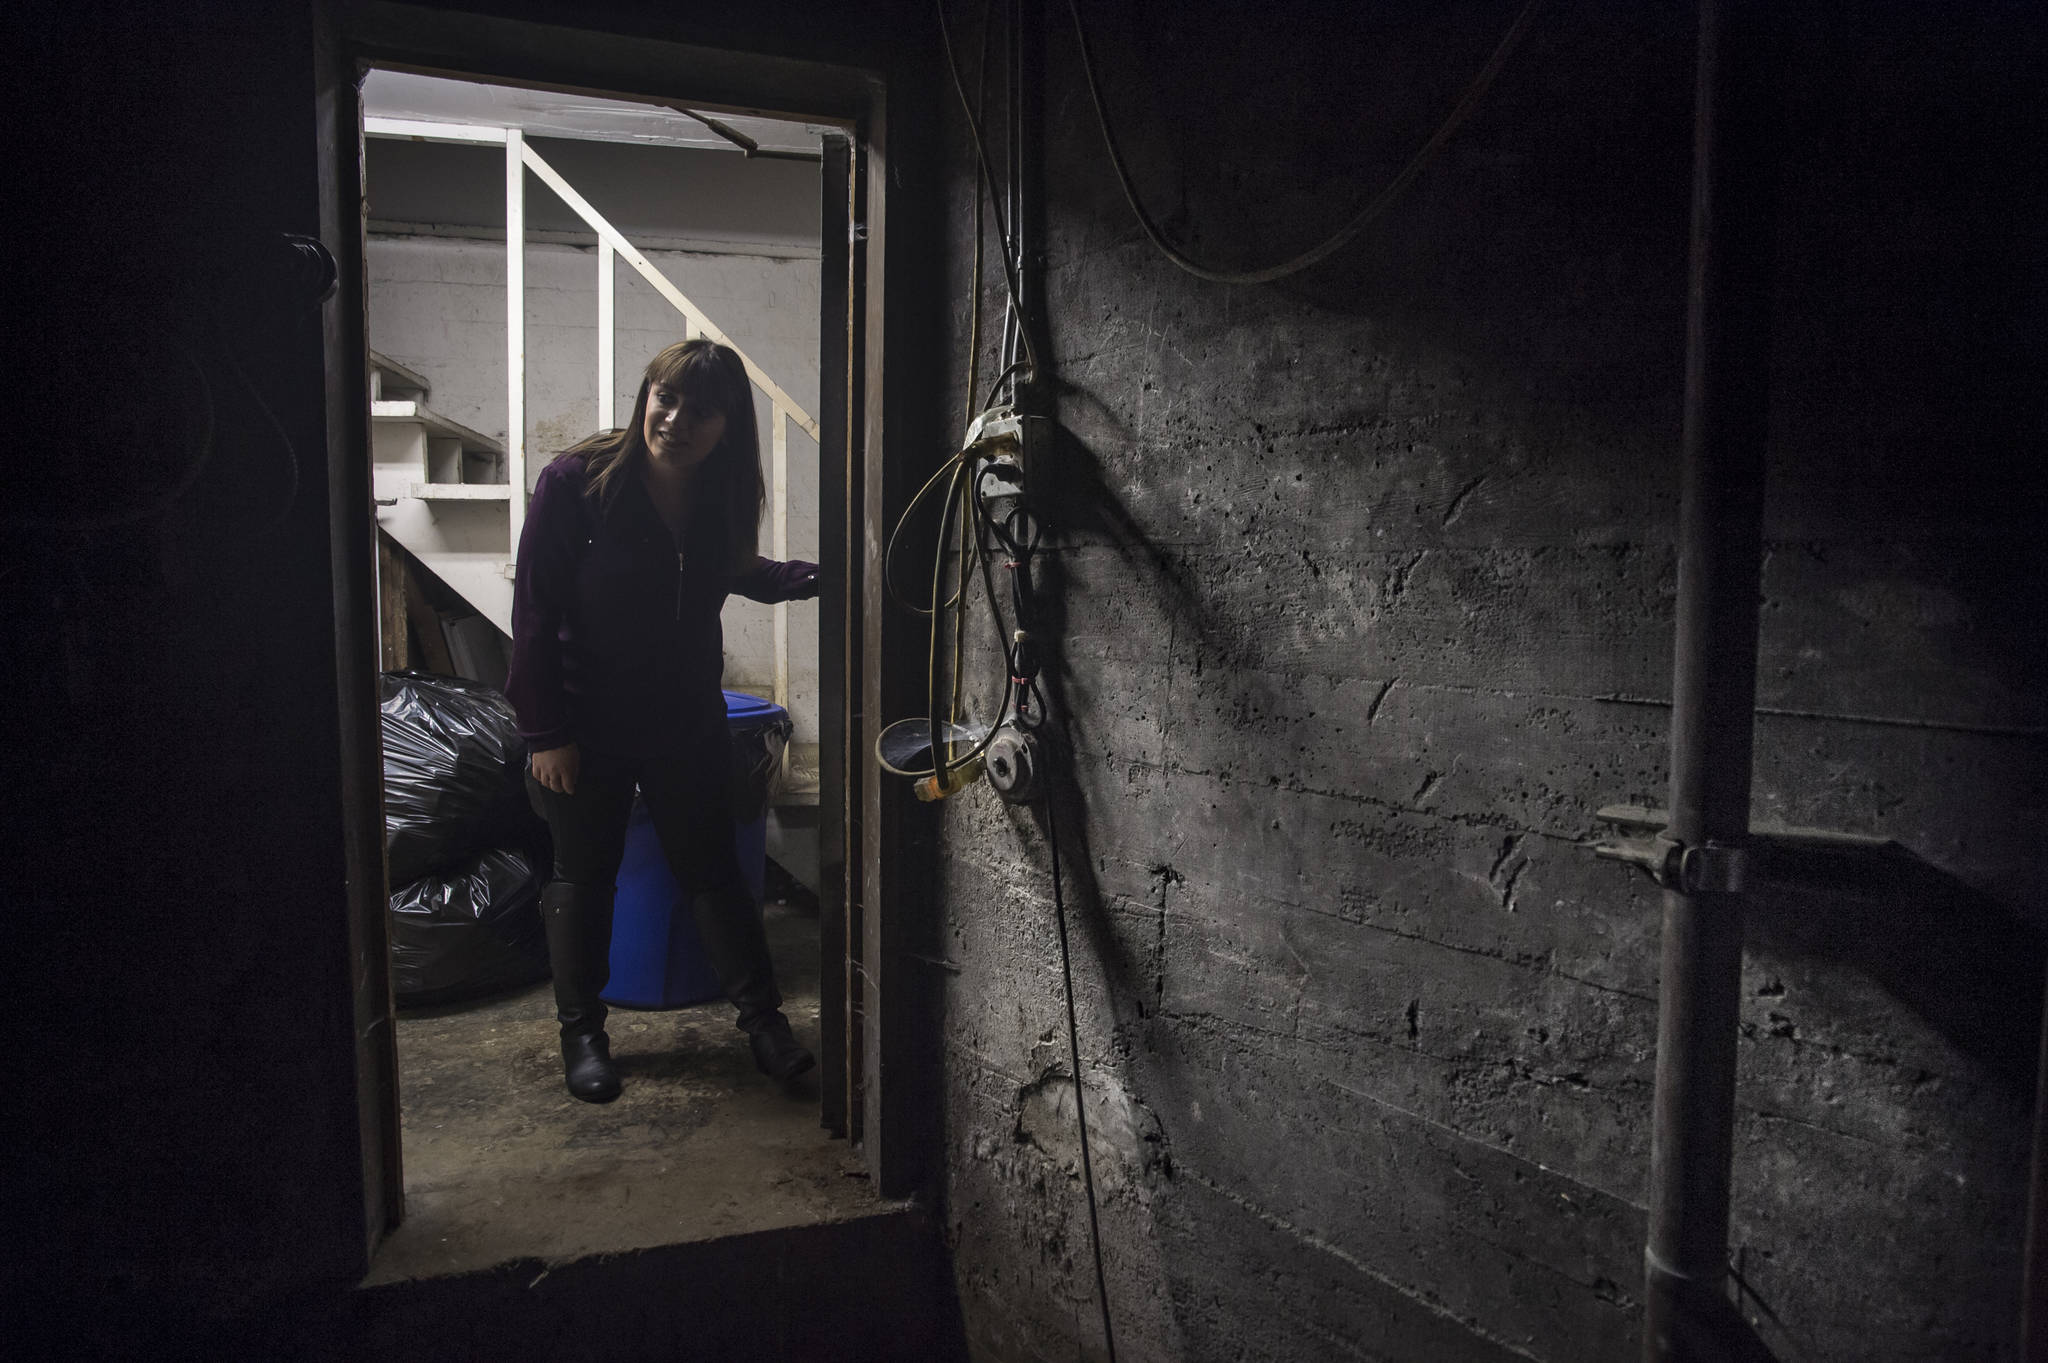 Juneau Drug manager Brenda Lamas peers into a basement storage room below the store on Monday, Oct. 30, 2017. The room is said to be haunted and Lamas said she will not enter the room. (Michael Penn | Juneau Empire)